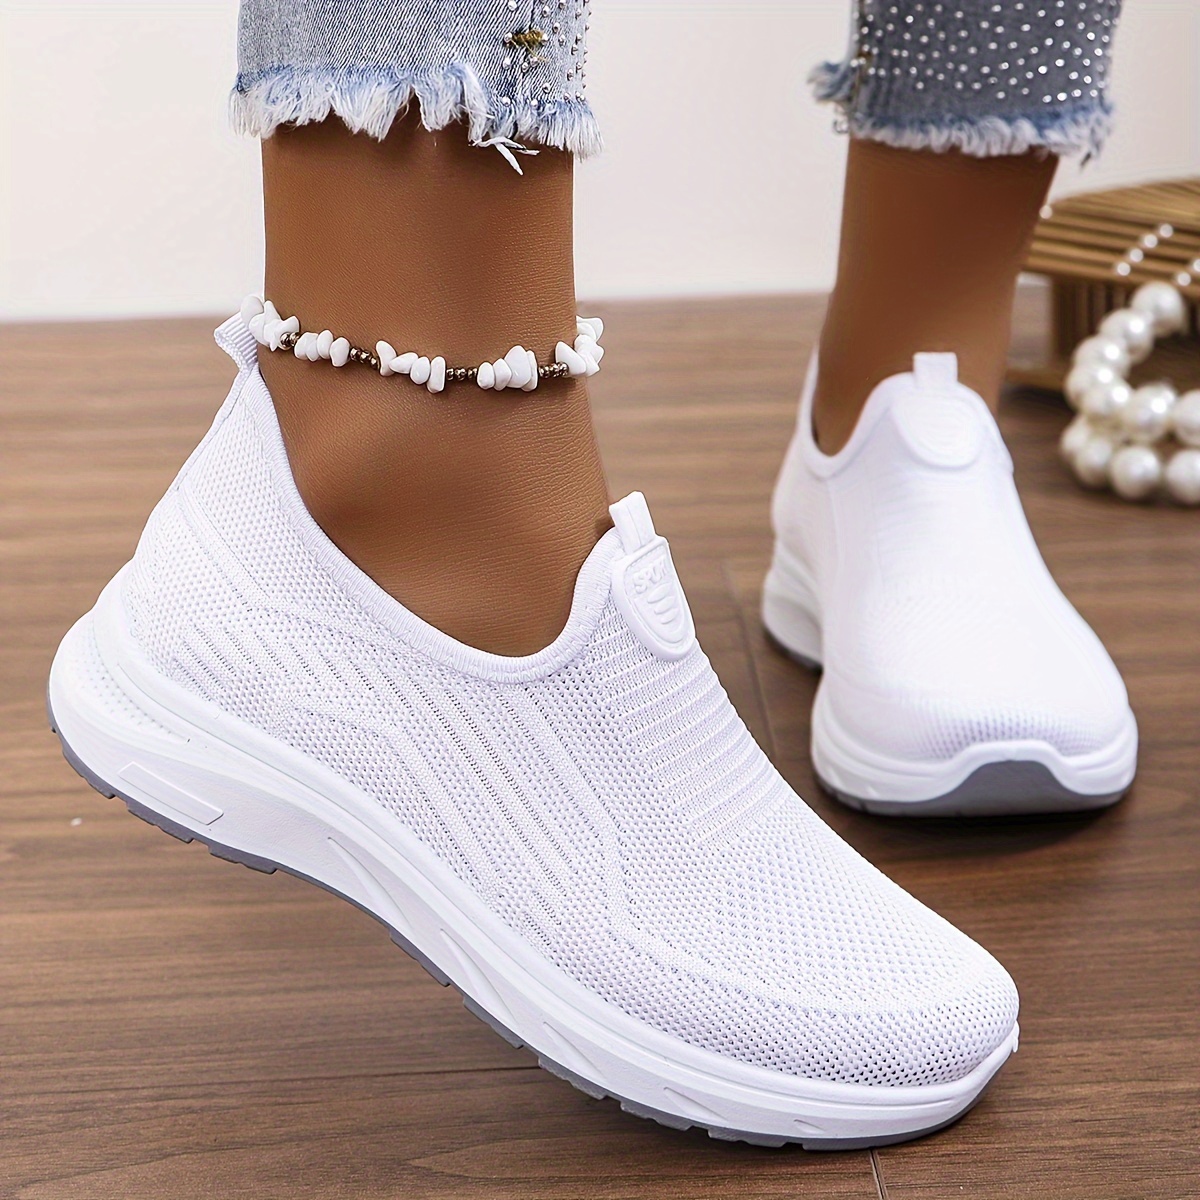 

Women's Solid Color Platform Sneakers, Breathable Knit Slip On Outdoor Shoes, Comfortable Low Top Sport Shoes